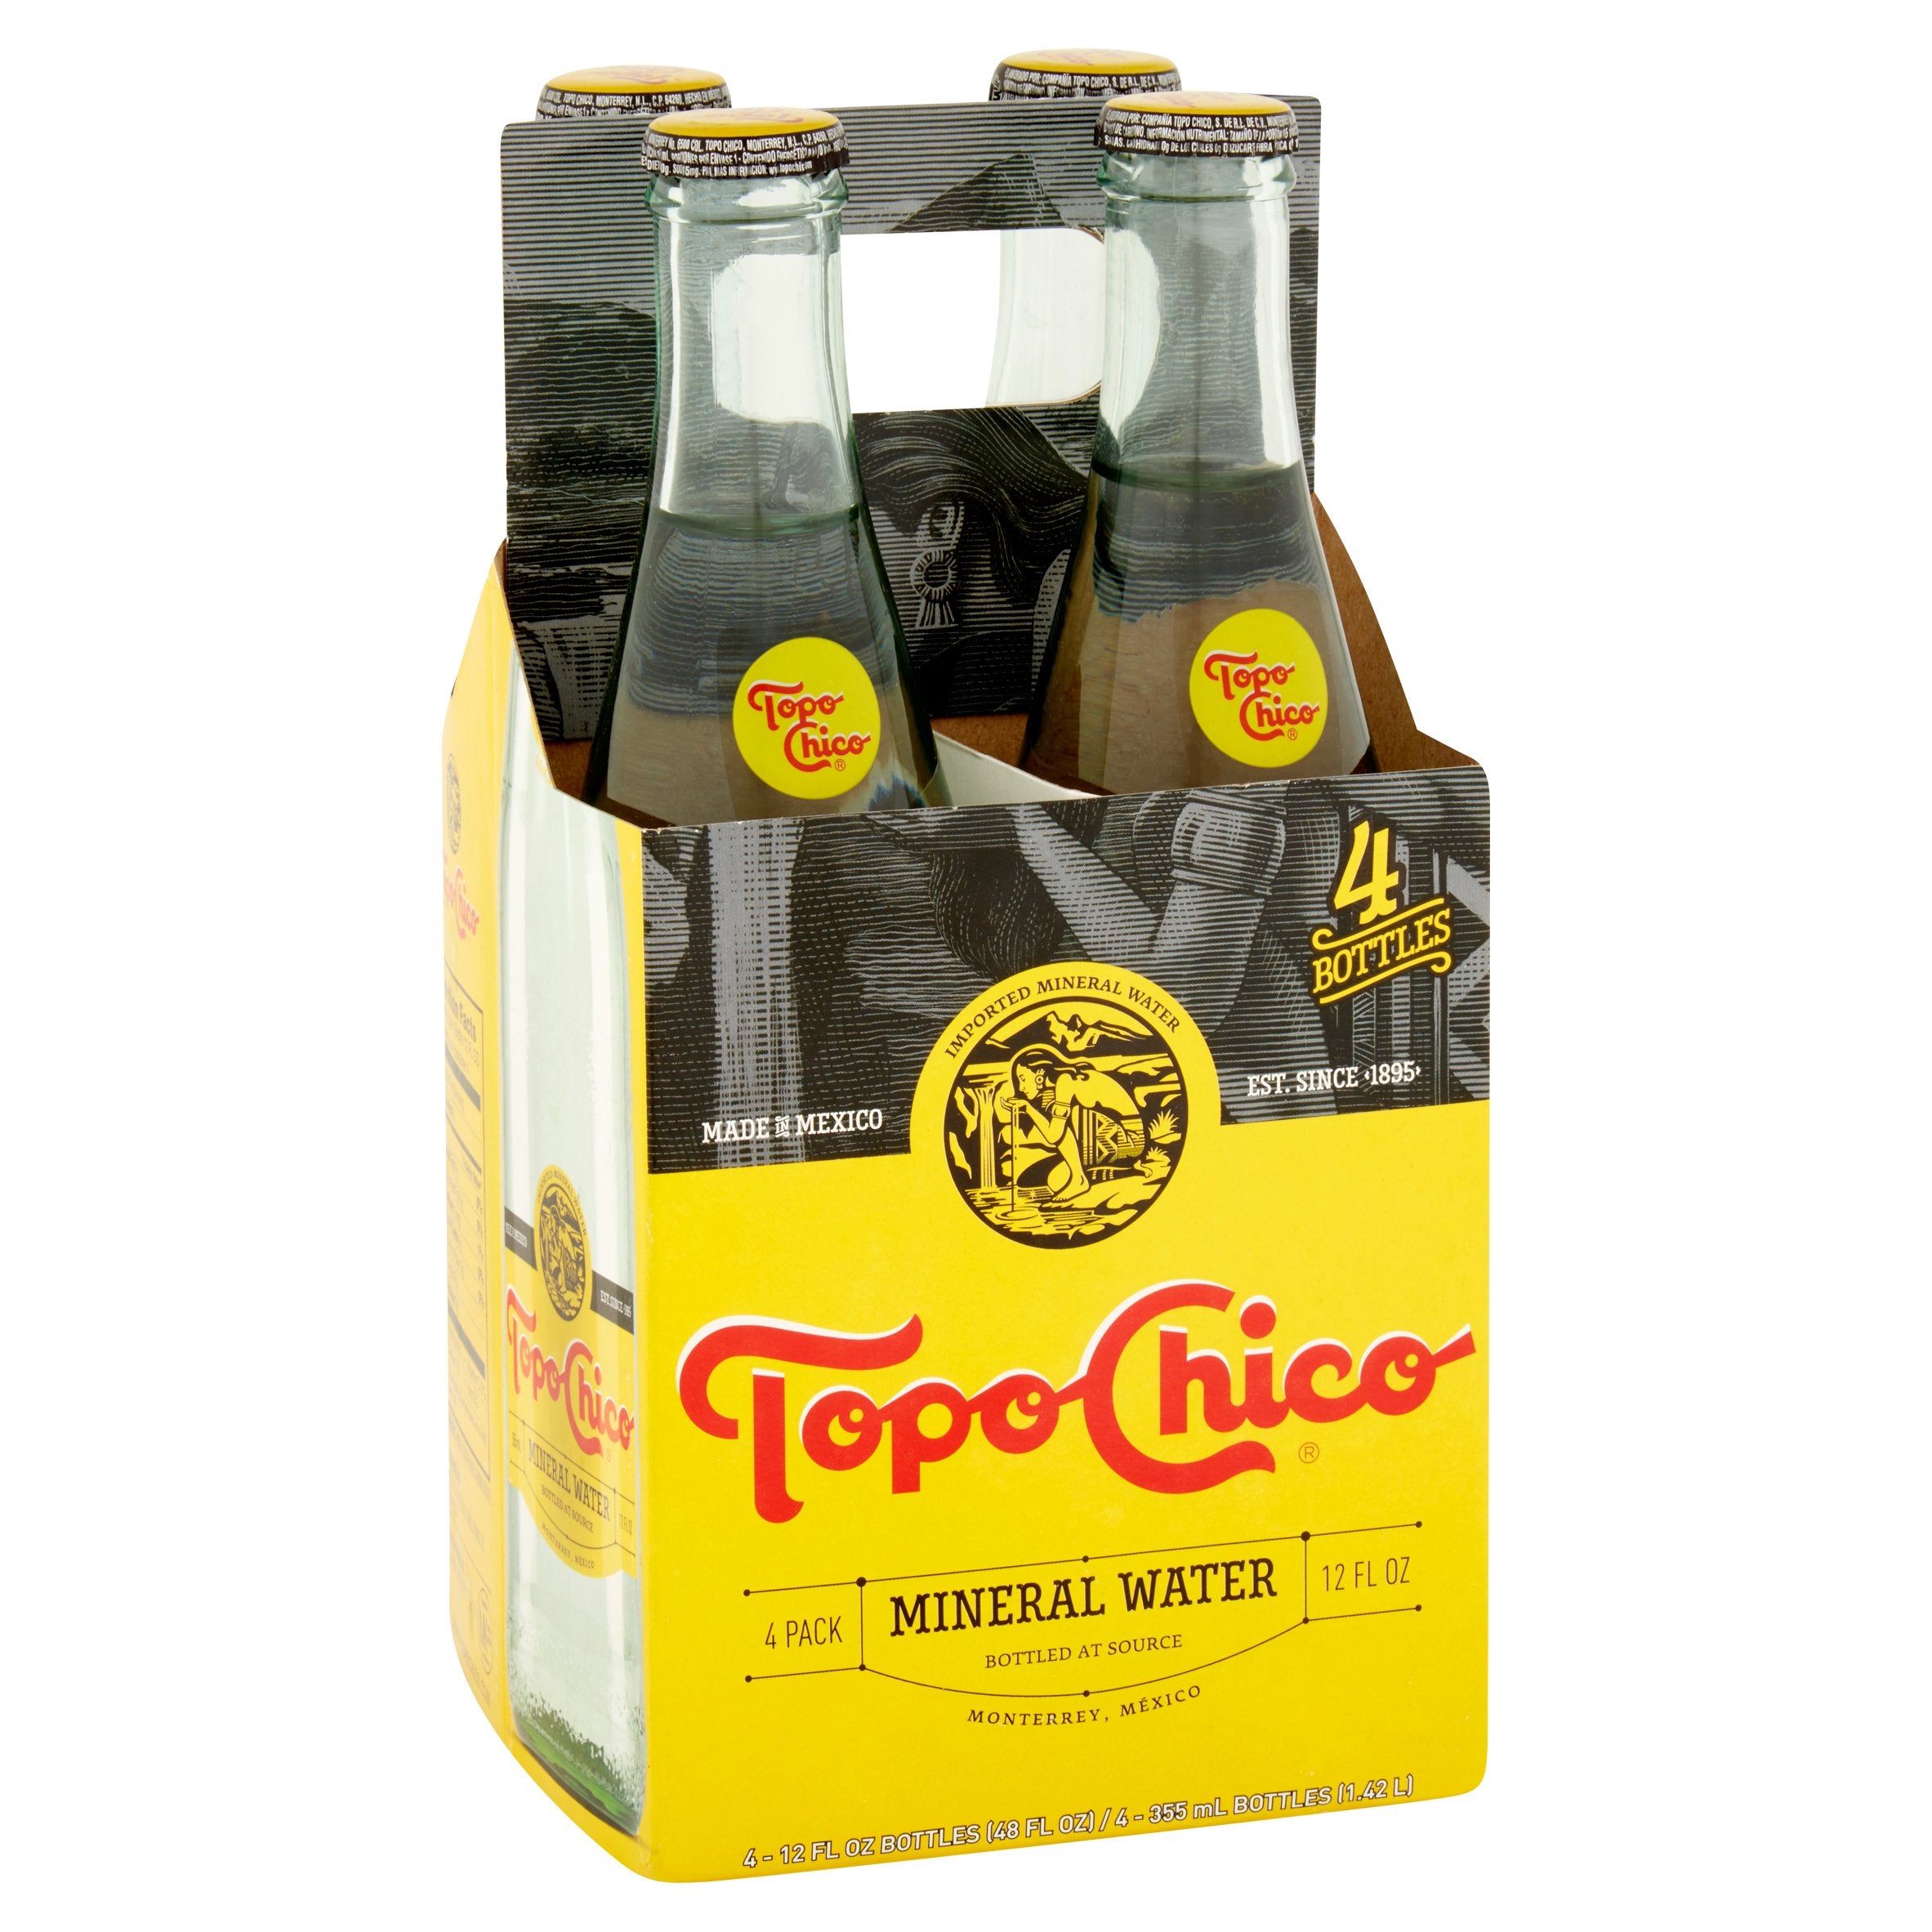 Topo Chico Mineral Water, 12 Ounce (12 Glass Bottles)